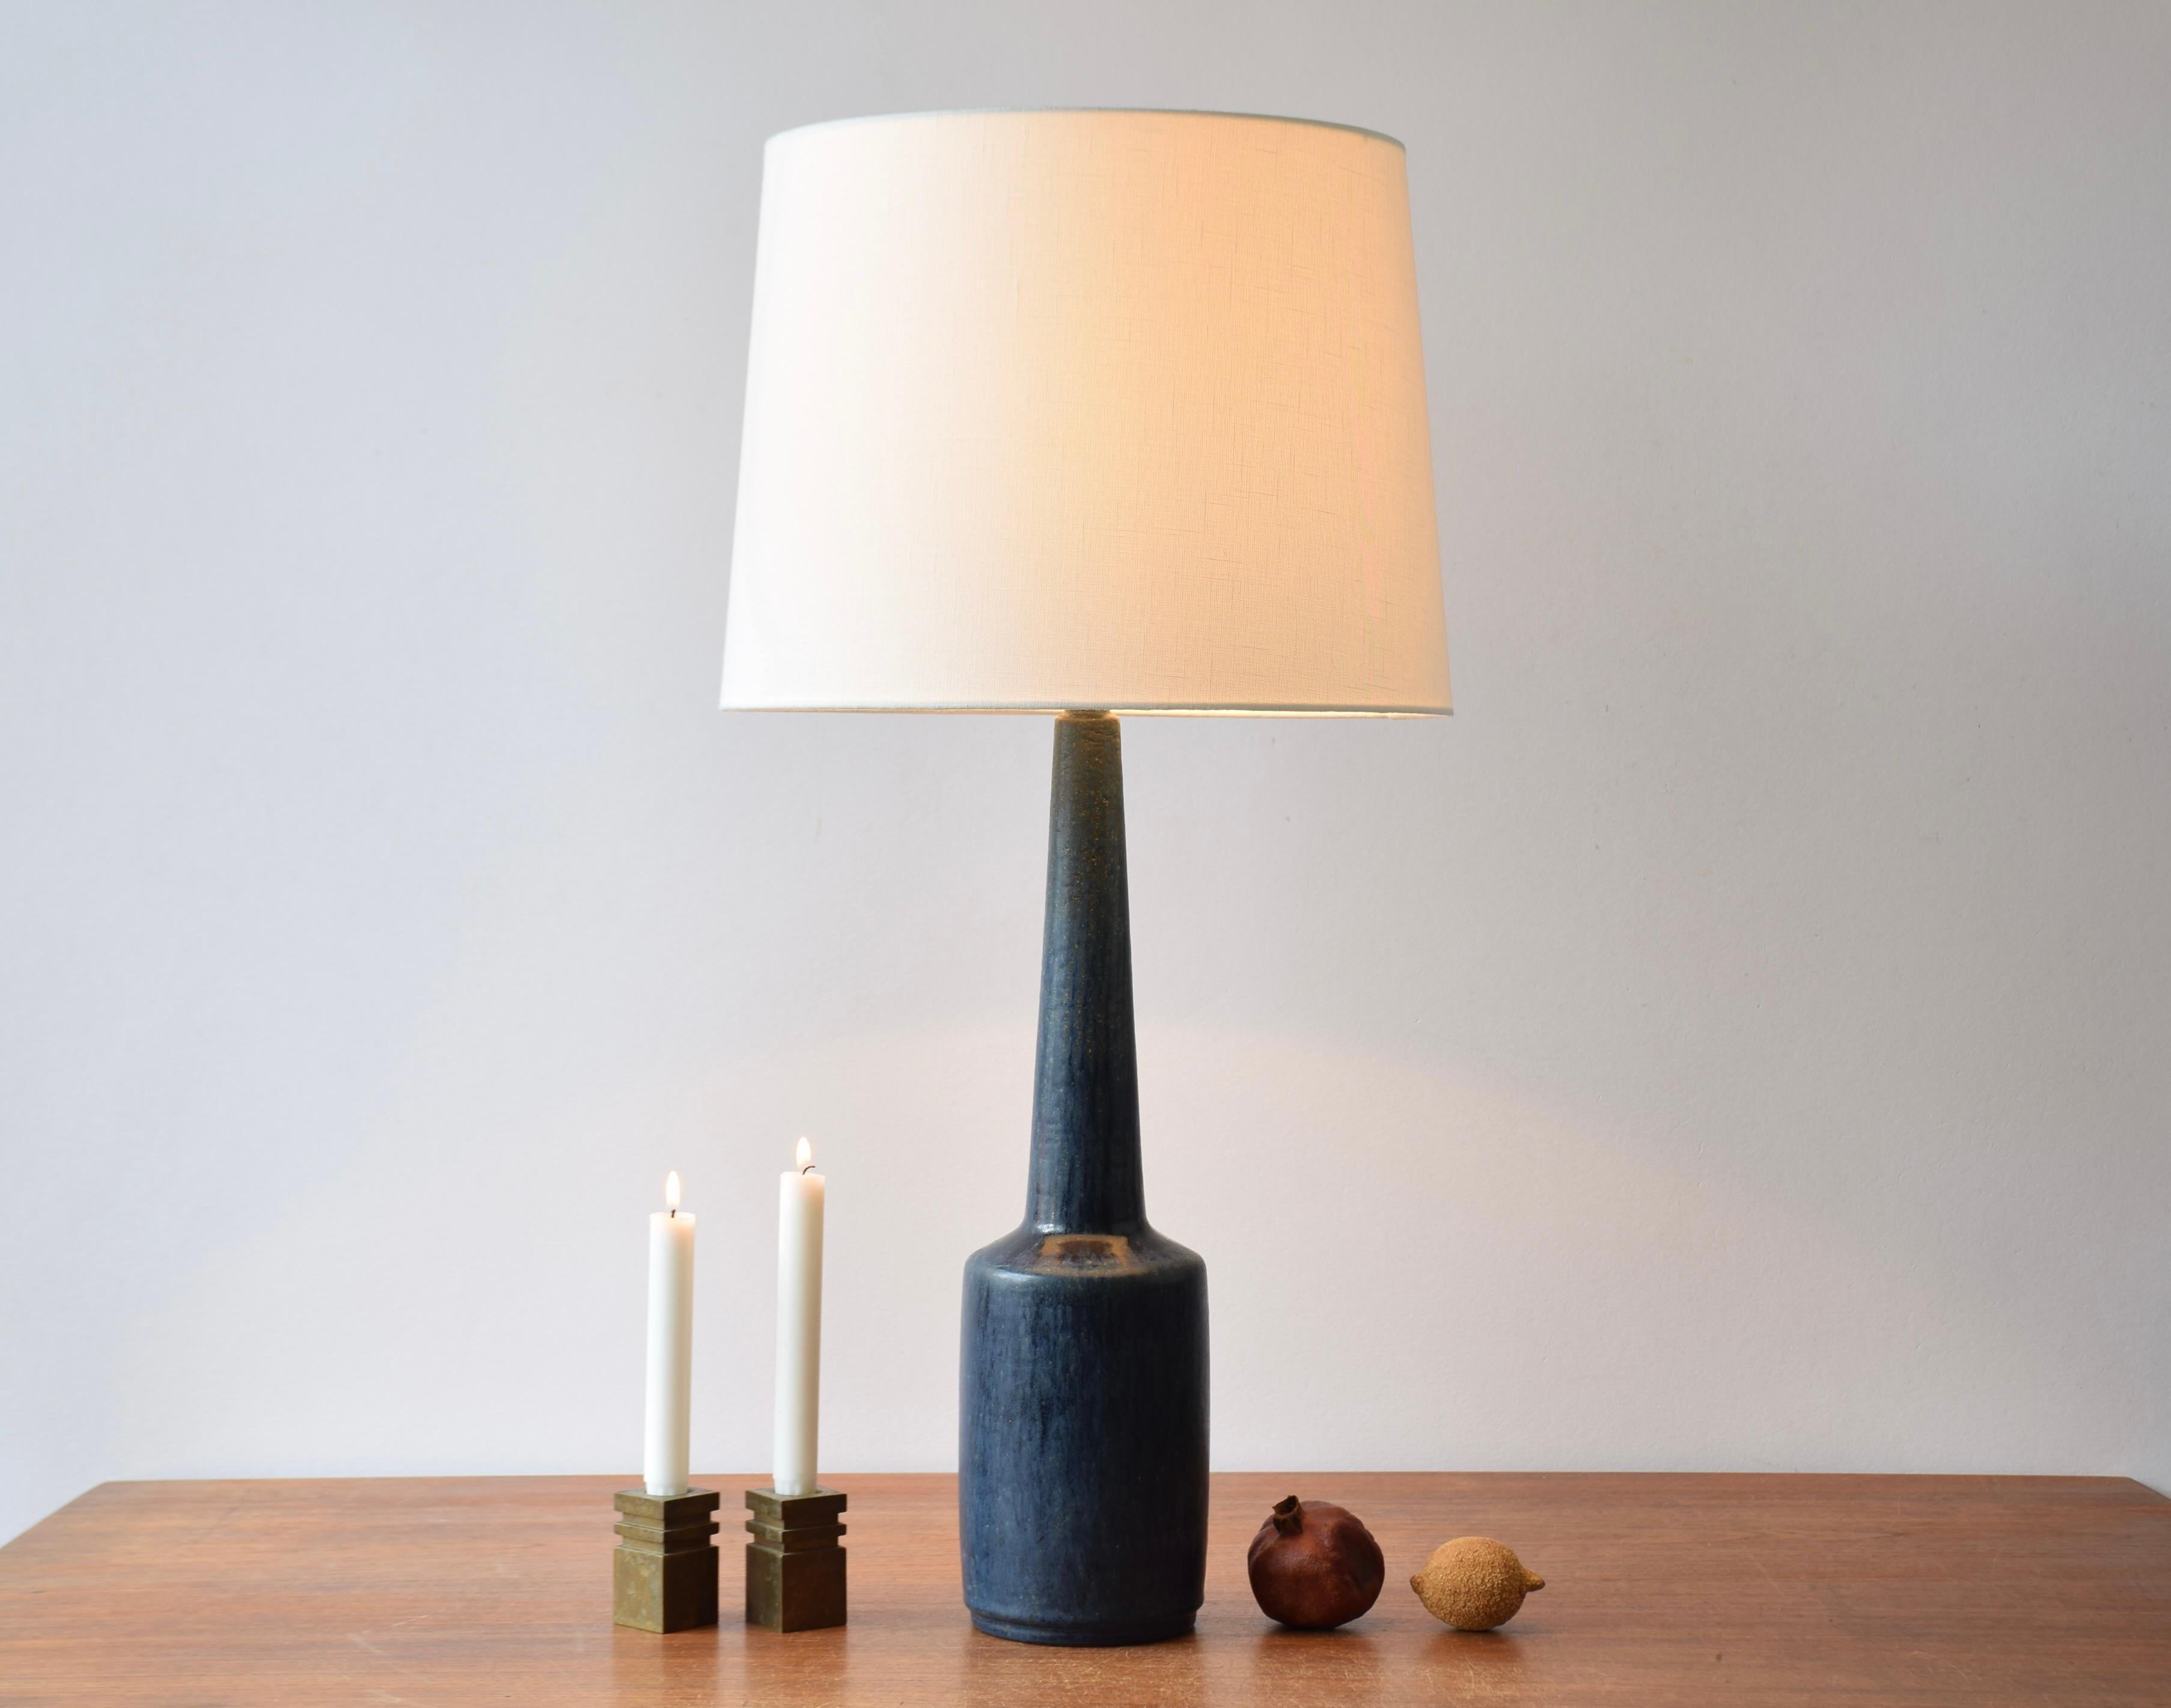 Very tall midcentury Danish table lamp from the ceramic workshop Palshus.
The lamp was designed by Per Linnemann-Schmidt and manufactured circa 1960s or early 1970s.

The lamp has a vivid midnight blue glaze with matte and partly glossy surface